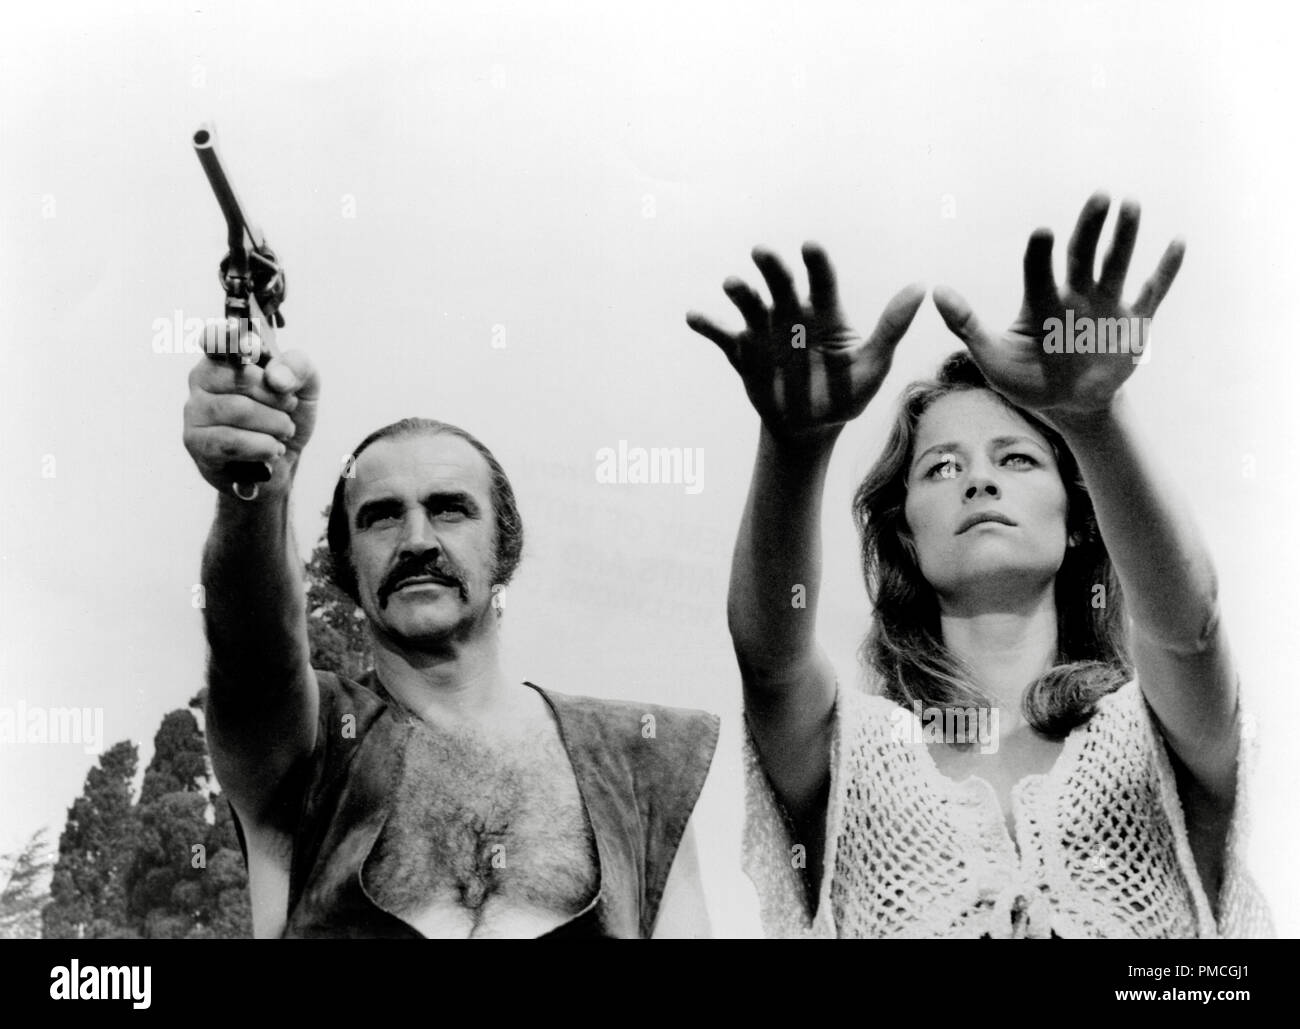 Sean Connery, Charlotte Rampling, 'Zardoz' (1974) 20th Century Fox  File Reference # 33536 907THA  For Editorial Use Only -  All Rights Reserved Stock Photo